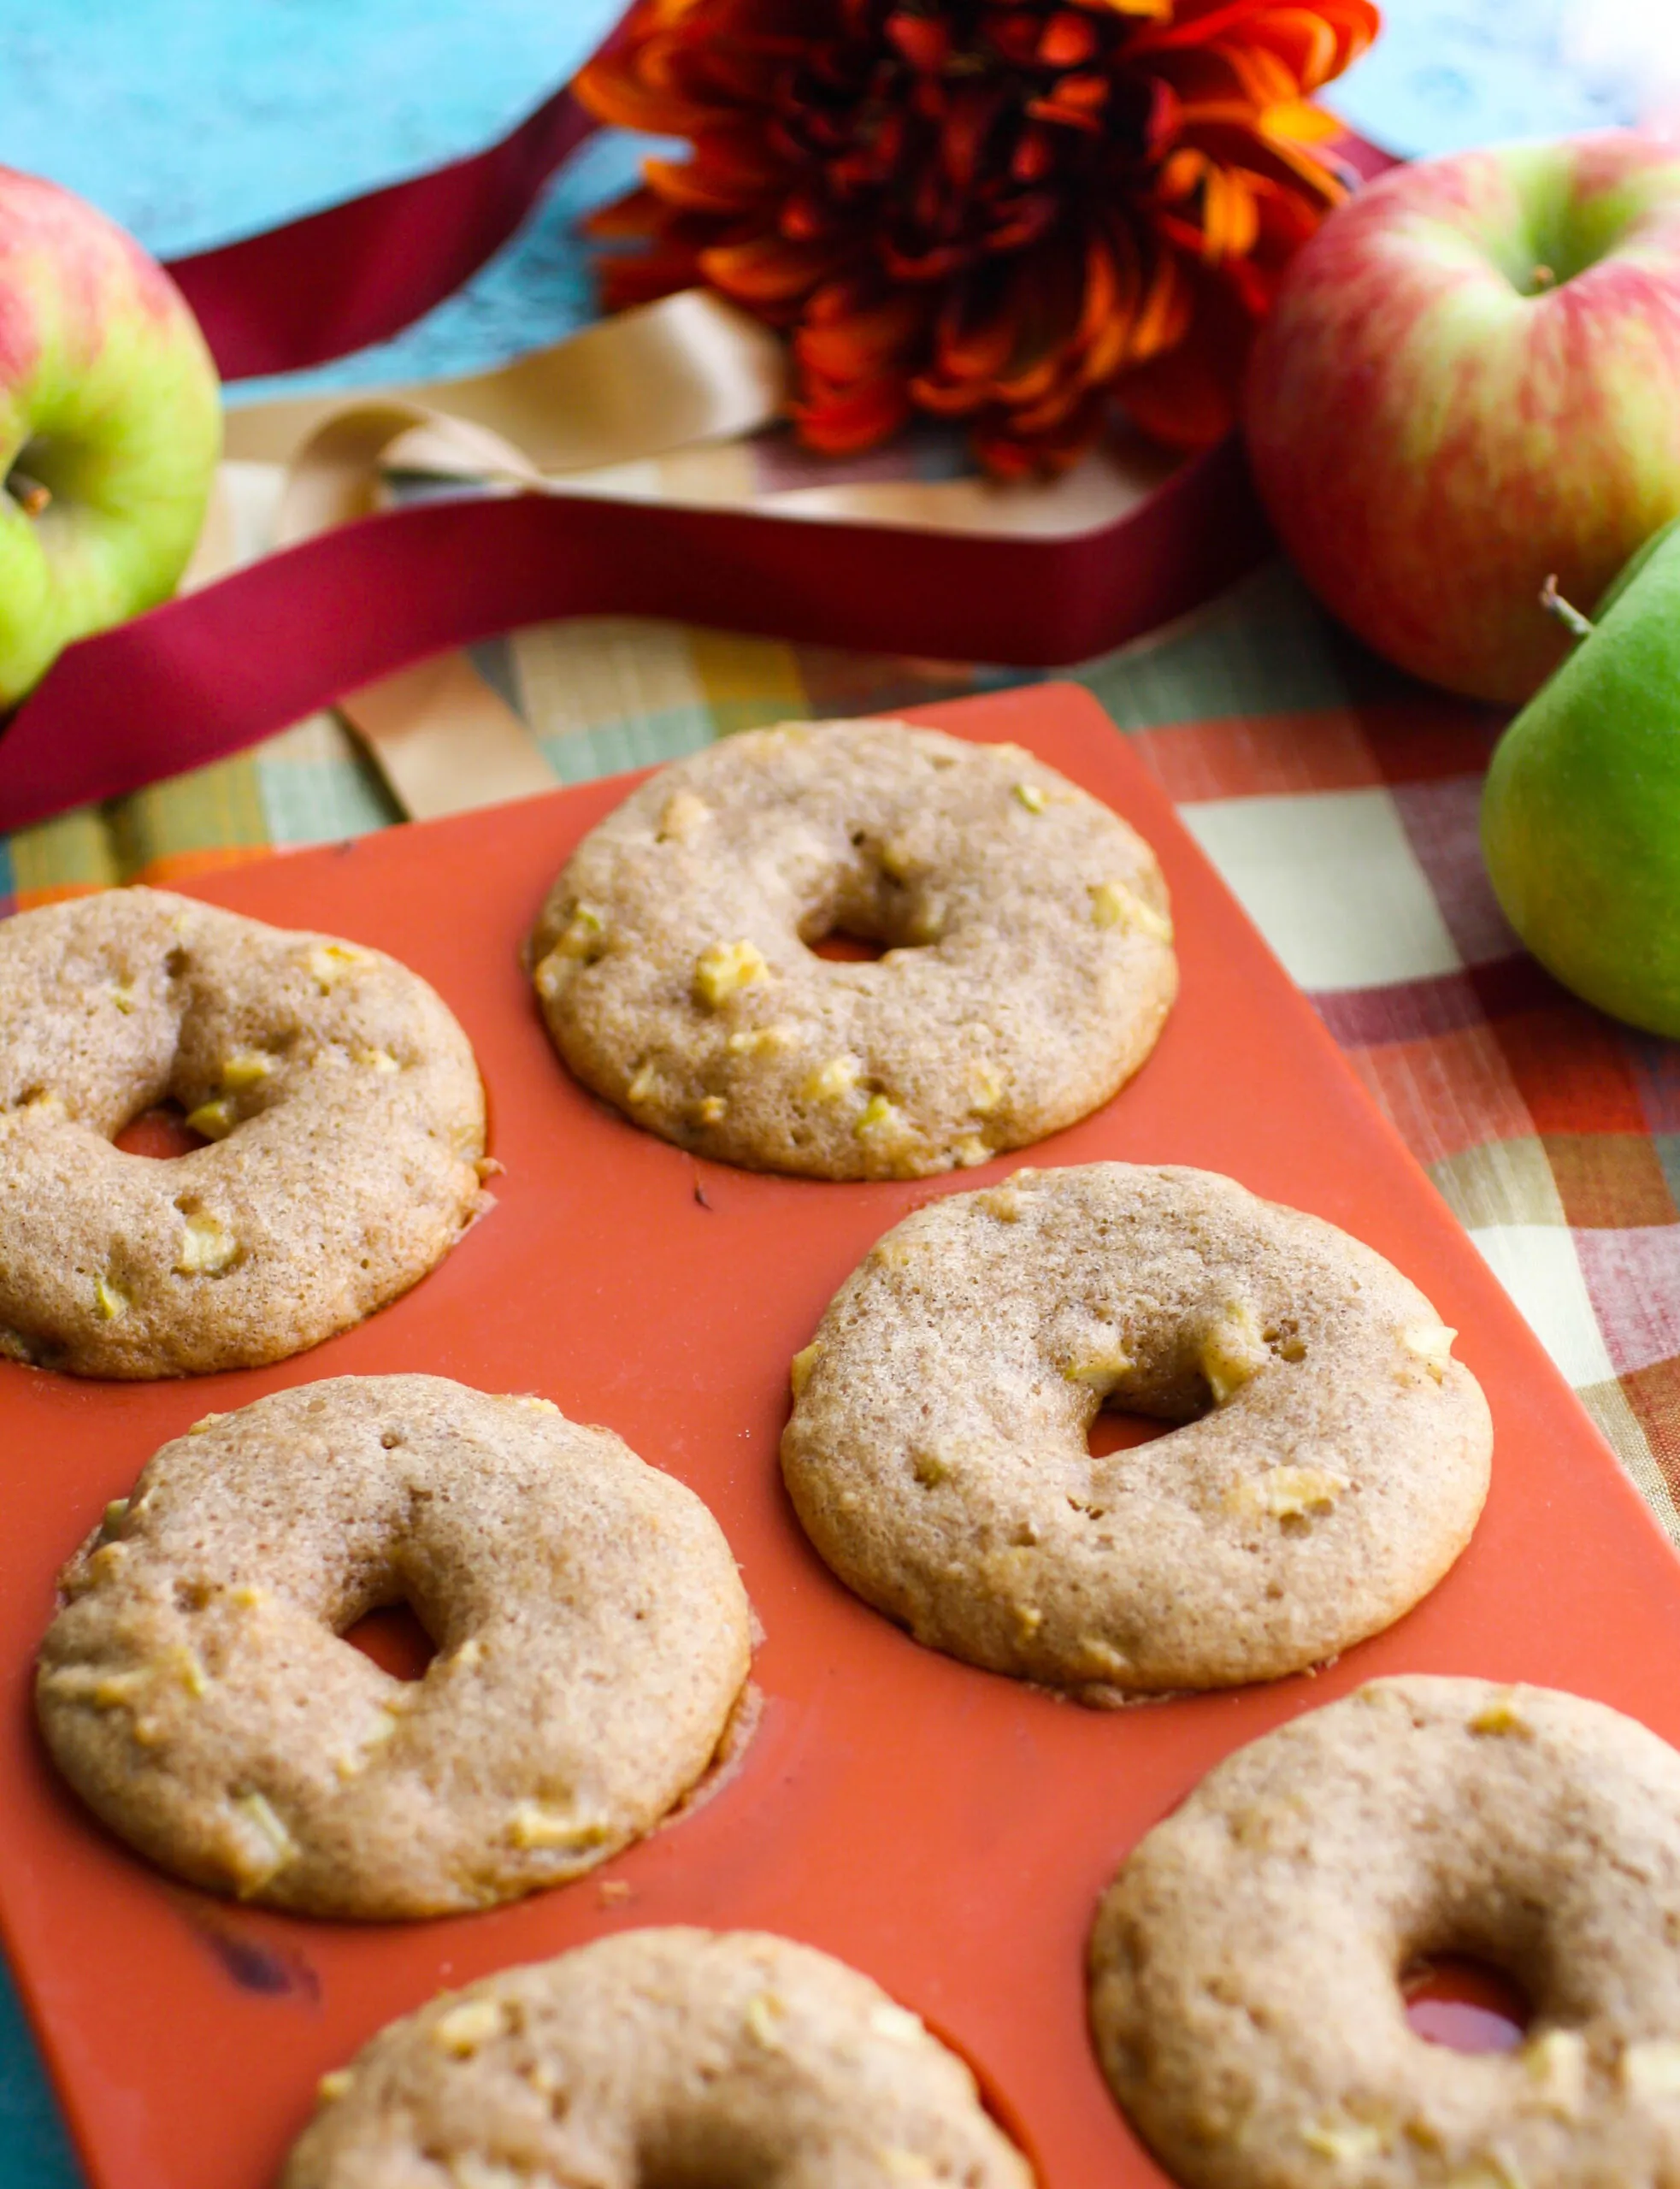 Bake up a batch of Baked Apple Cider Donuts this season!